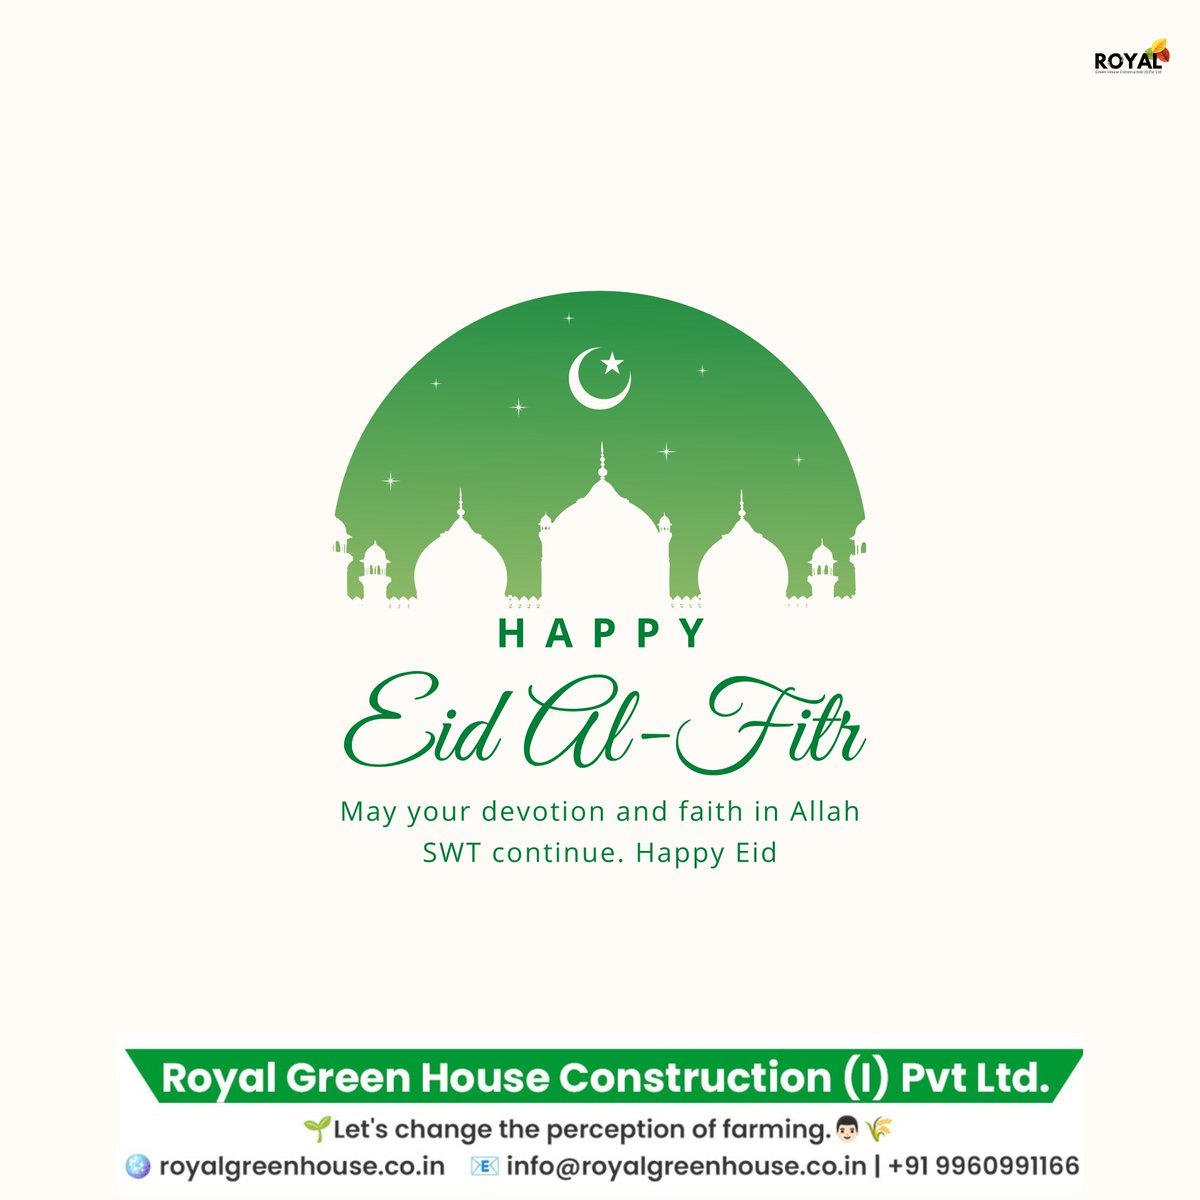 'Eid Mubarak to all our tall hydroponic farmers! 🌿 May this joyous occasion bring you abundant blessings and prosperity in your endeavors. Wishing you a harvest of happiness and success. #EidMubarak #HydroponicHarvest #CelebratingUnity'